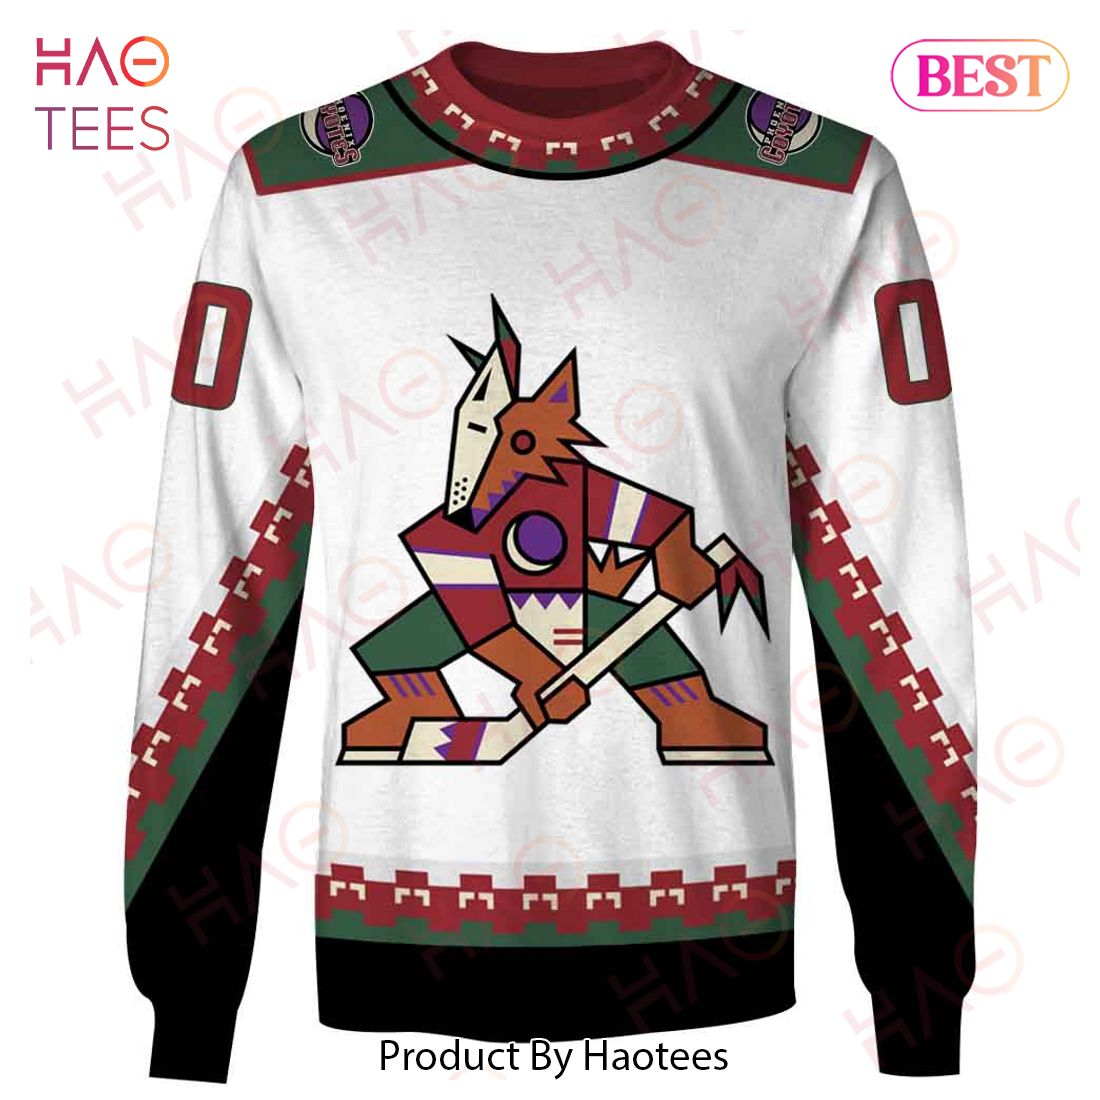 Arizona Coyotes - Away Jersey Concept by Gojira5000 on DeviantArt